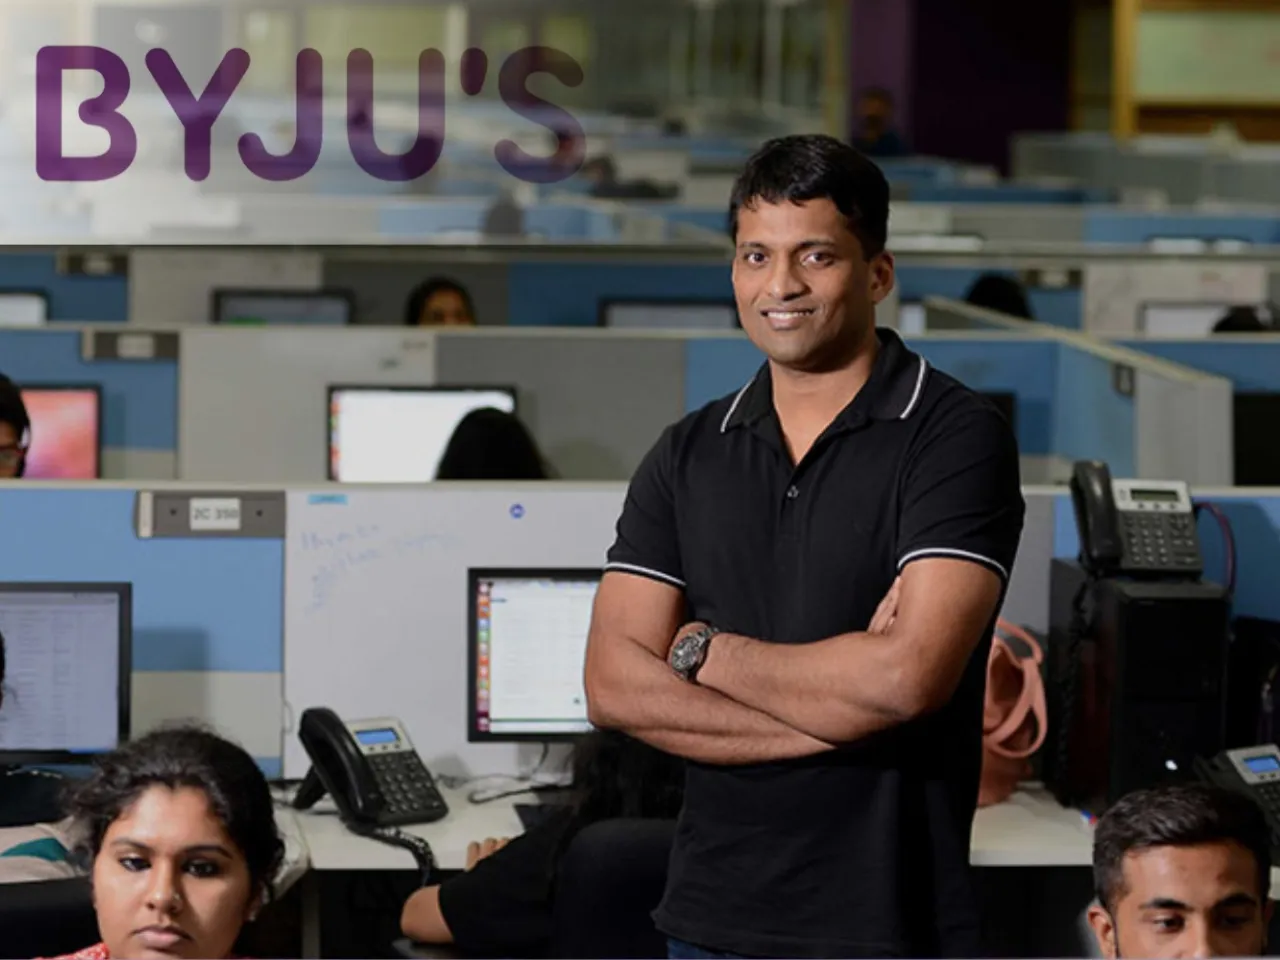 byjus employees